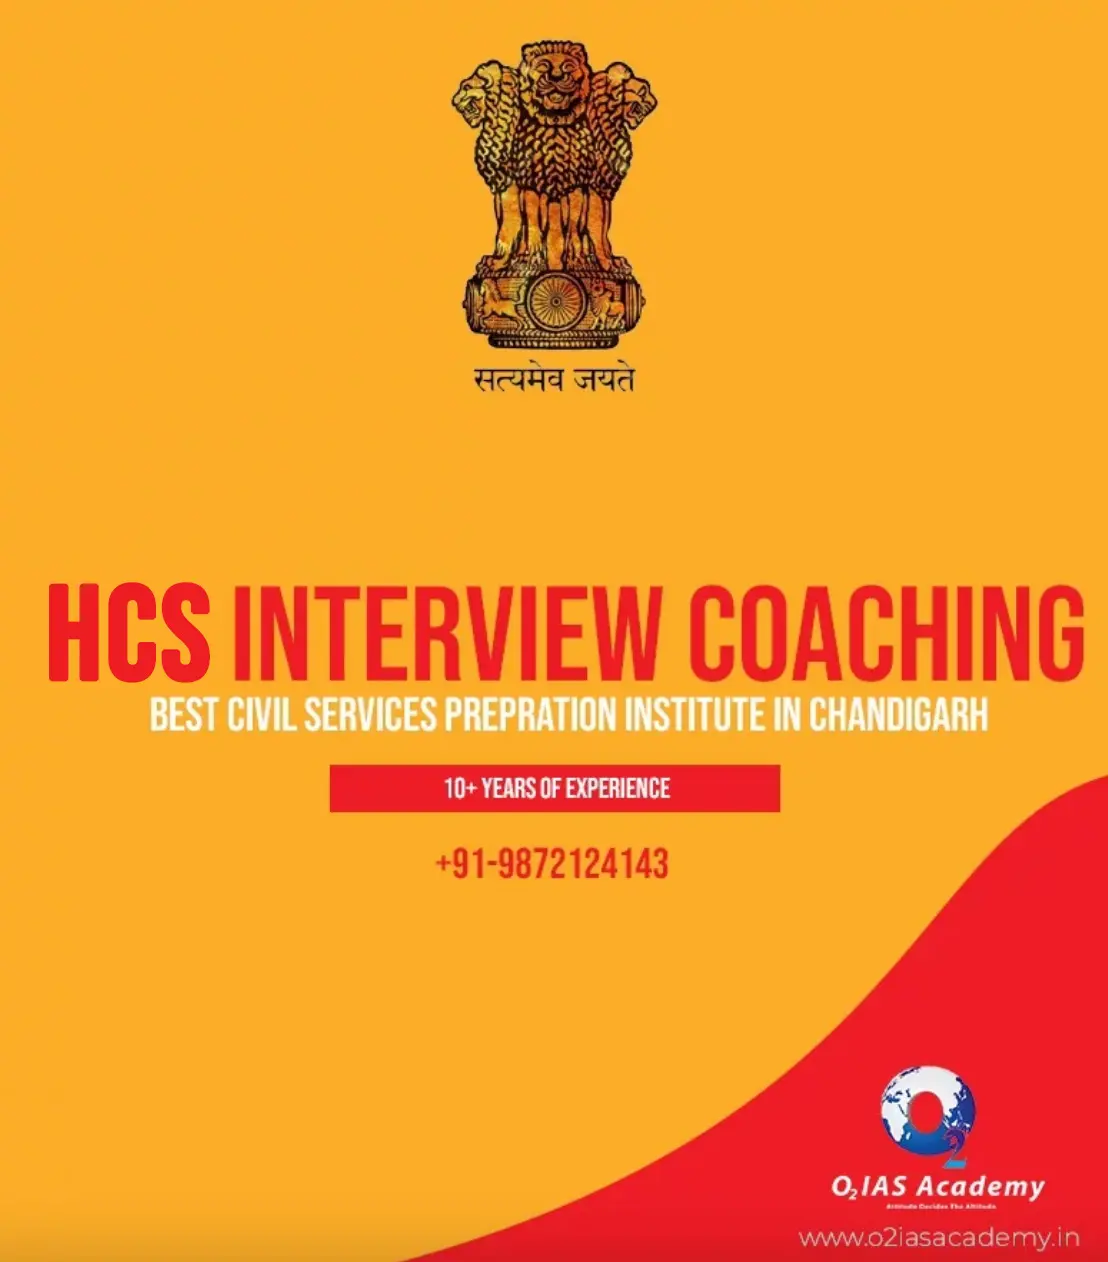 HCS Interview Coaching in Chandigarh | O2 IAS Academy